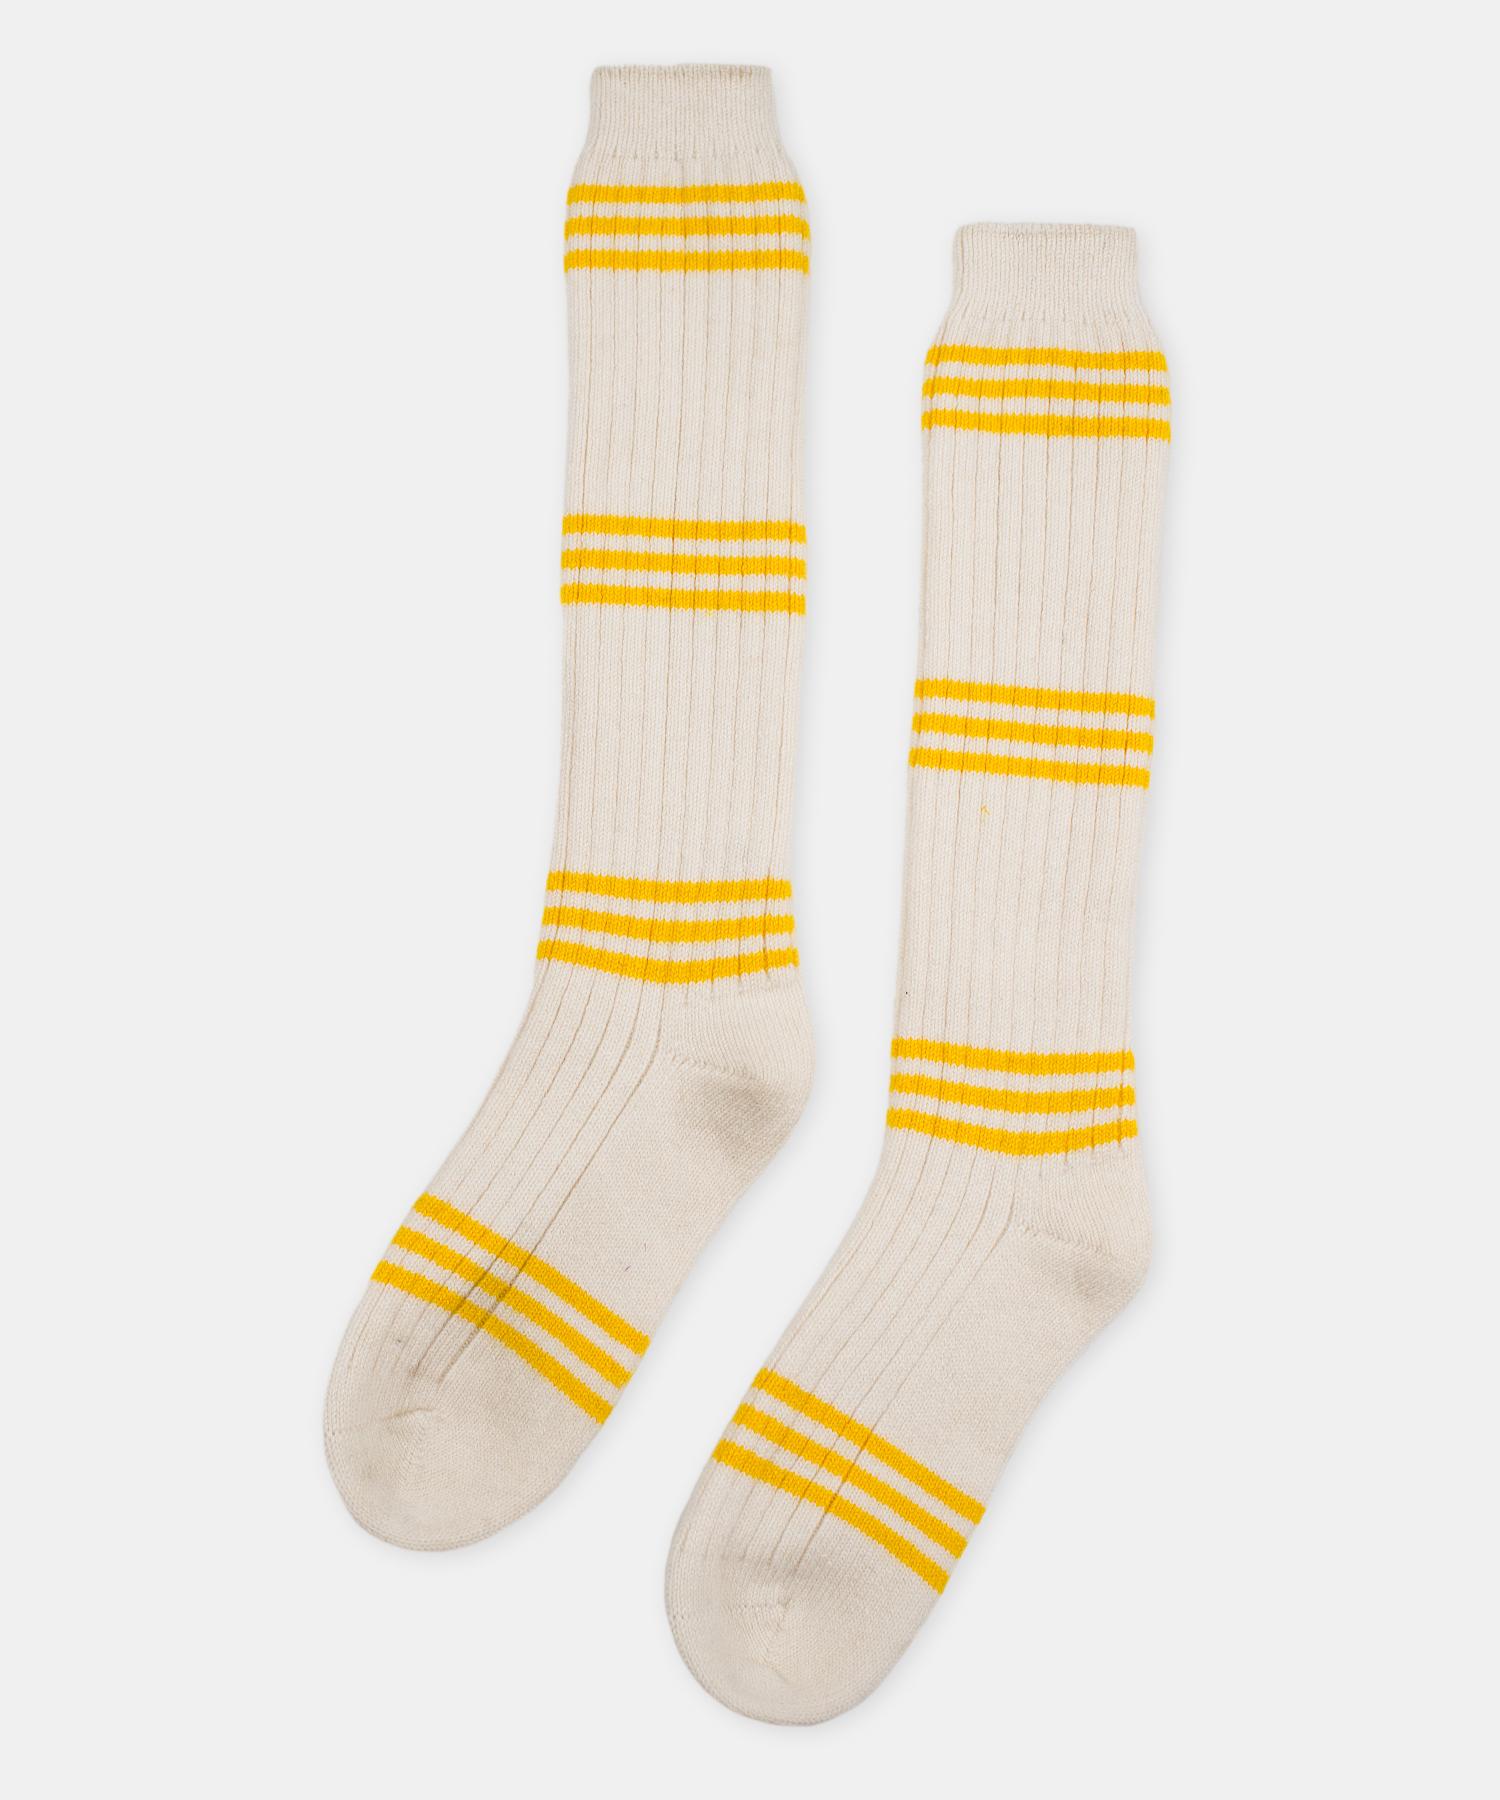 Mongolian Pair of Striped Cashmere Tube Socks by Saved, New York